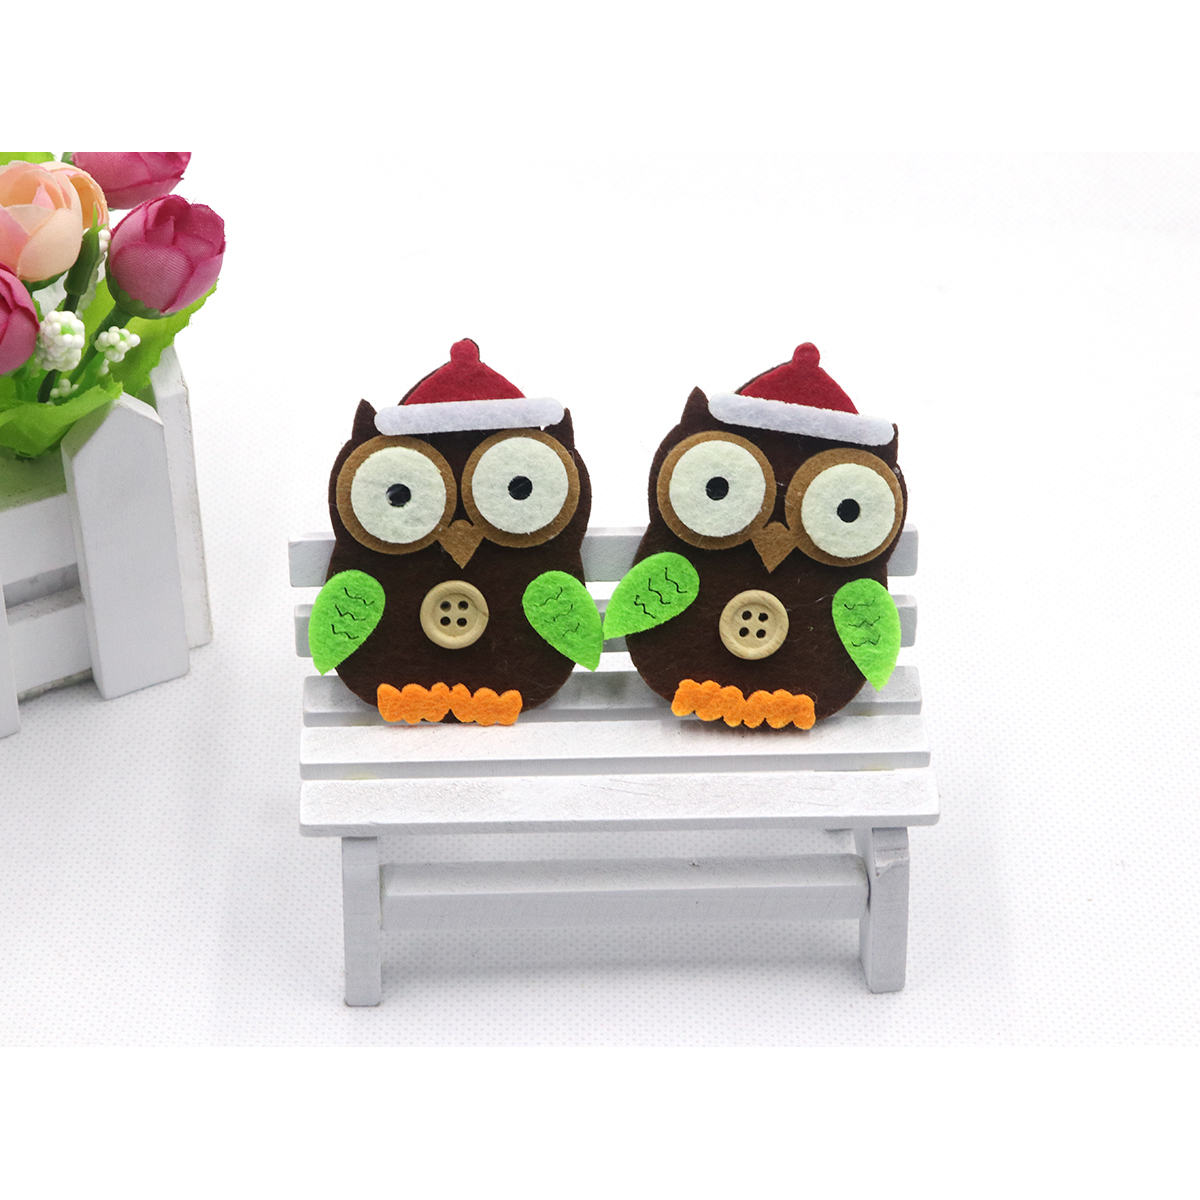 20pcs Large Felt Owl Animals with Button 2″-Brown